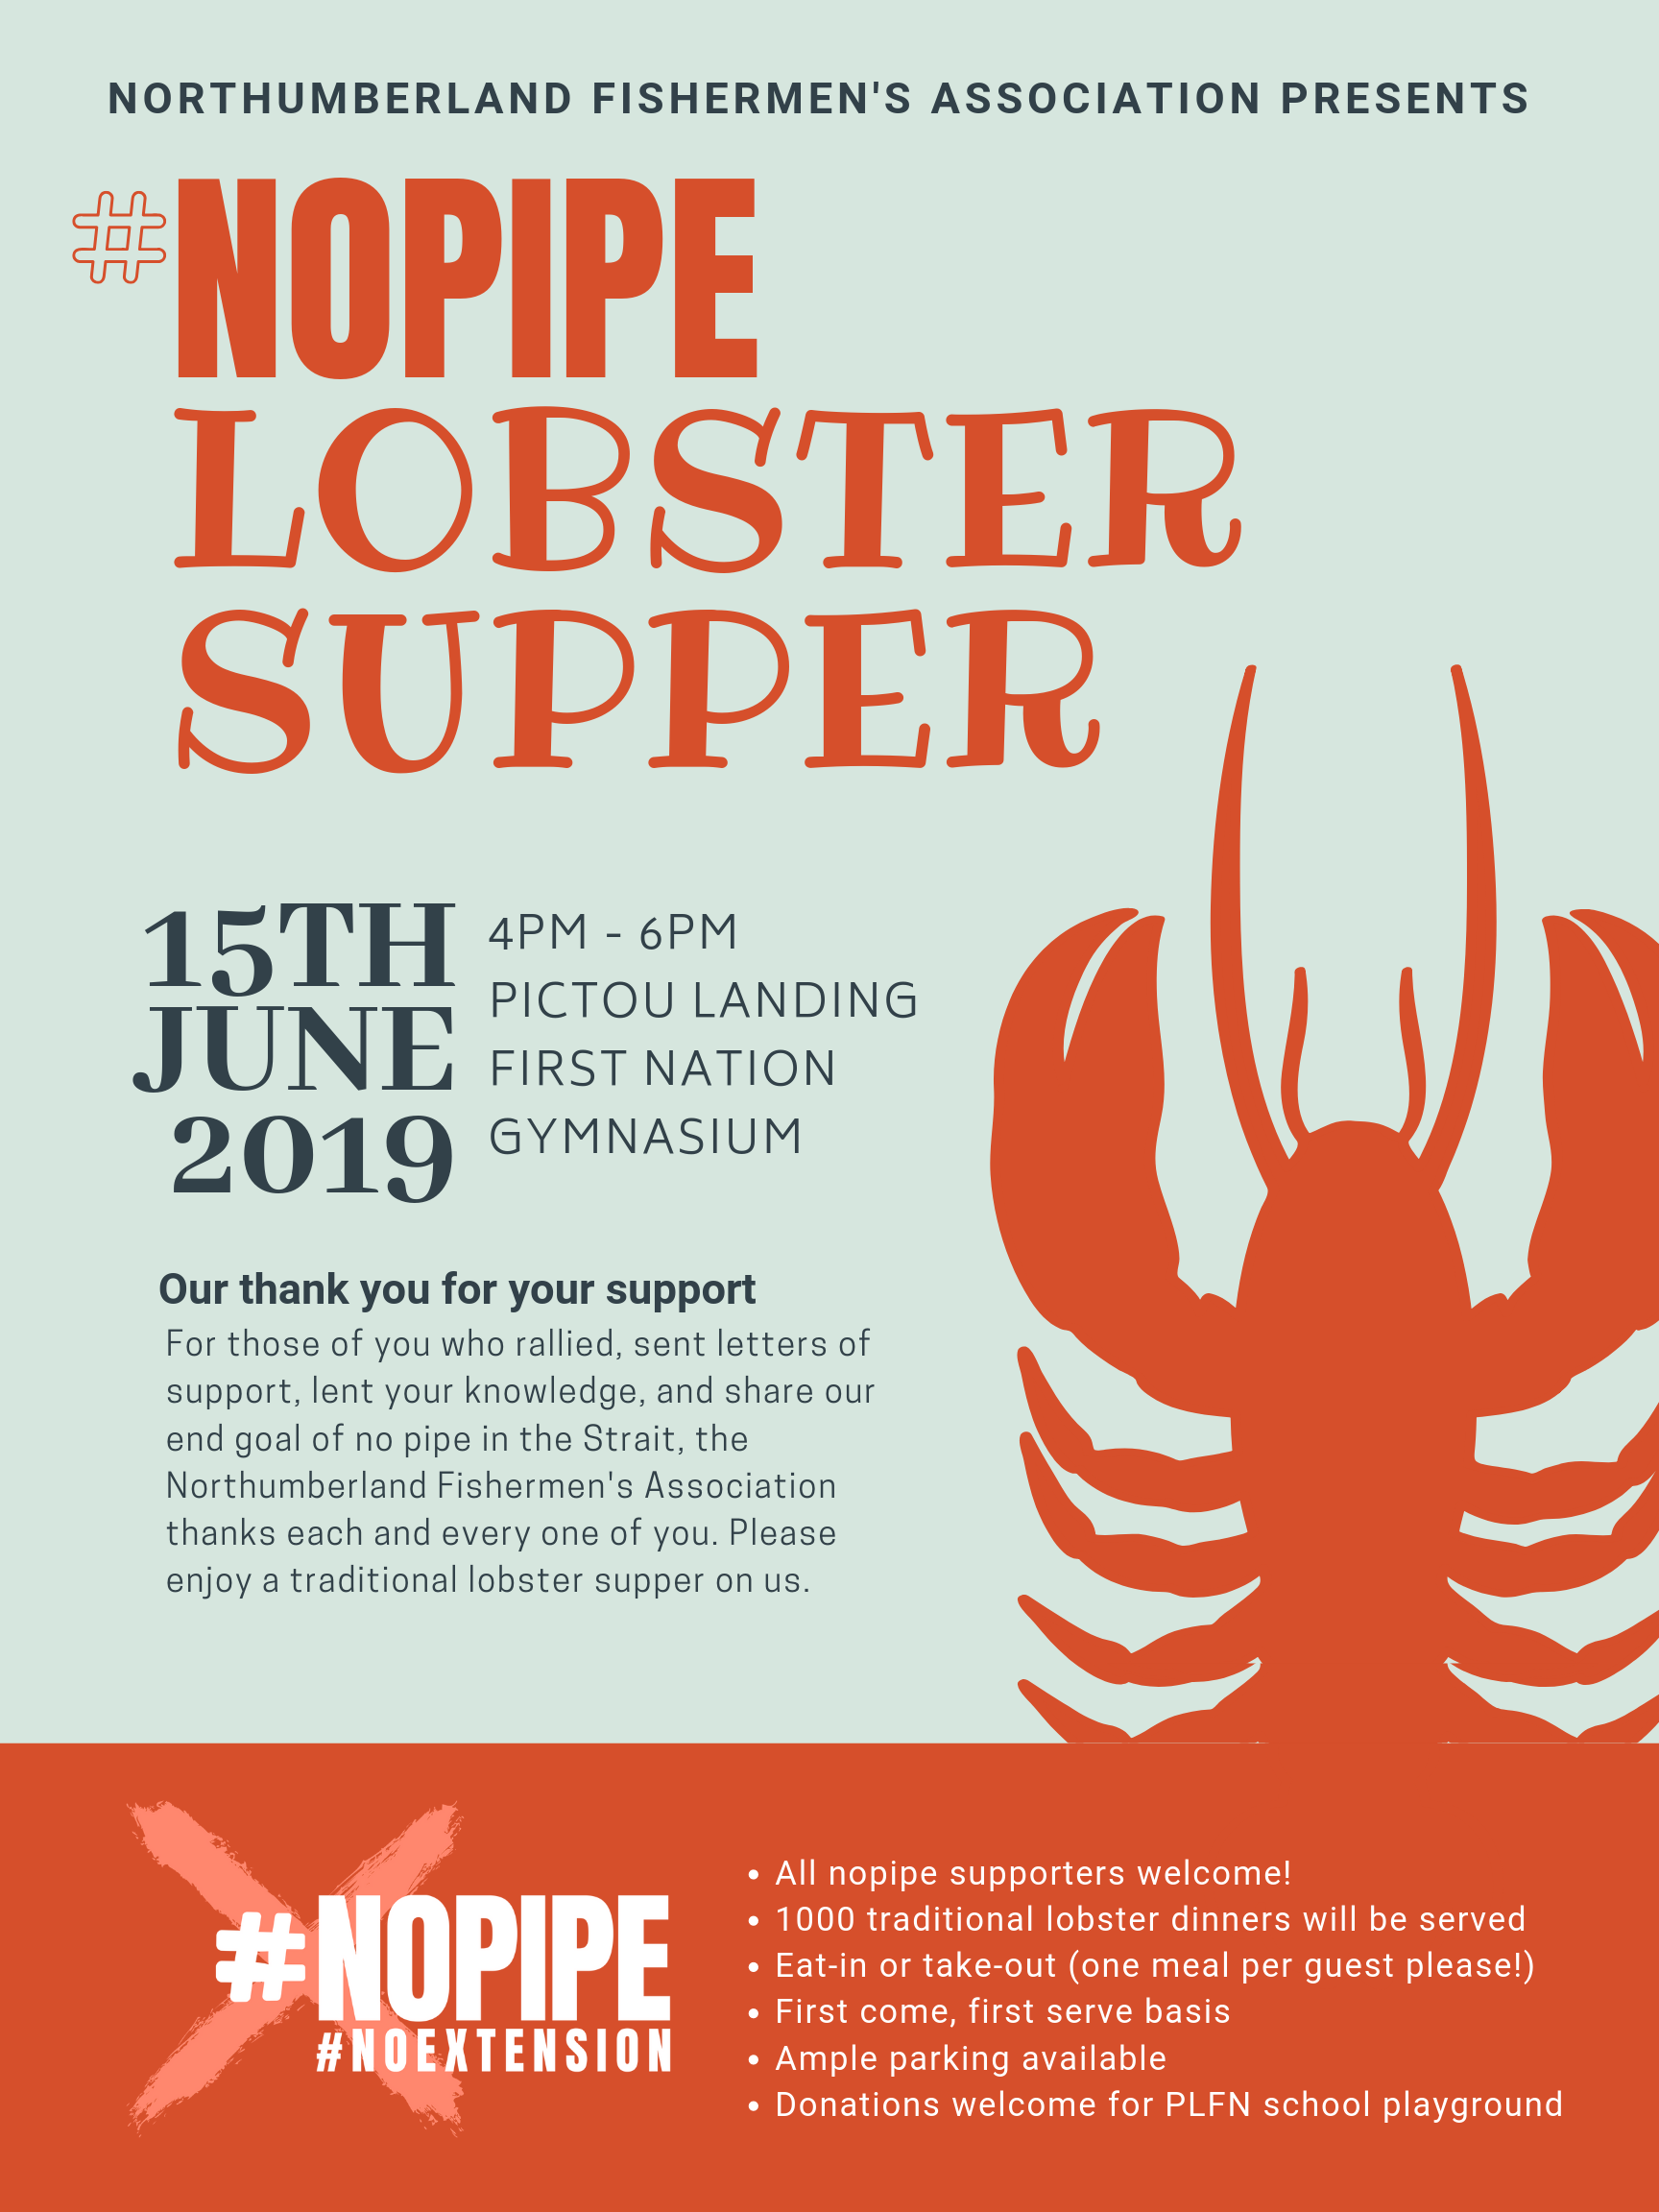 Northumberland Fishing Association Serving 1,000 Free Lobster Suppers to No Pipe Supporters